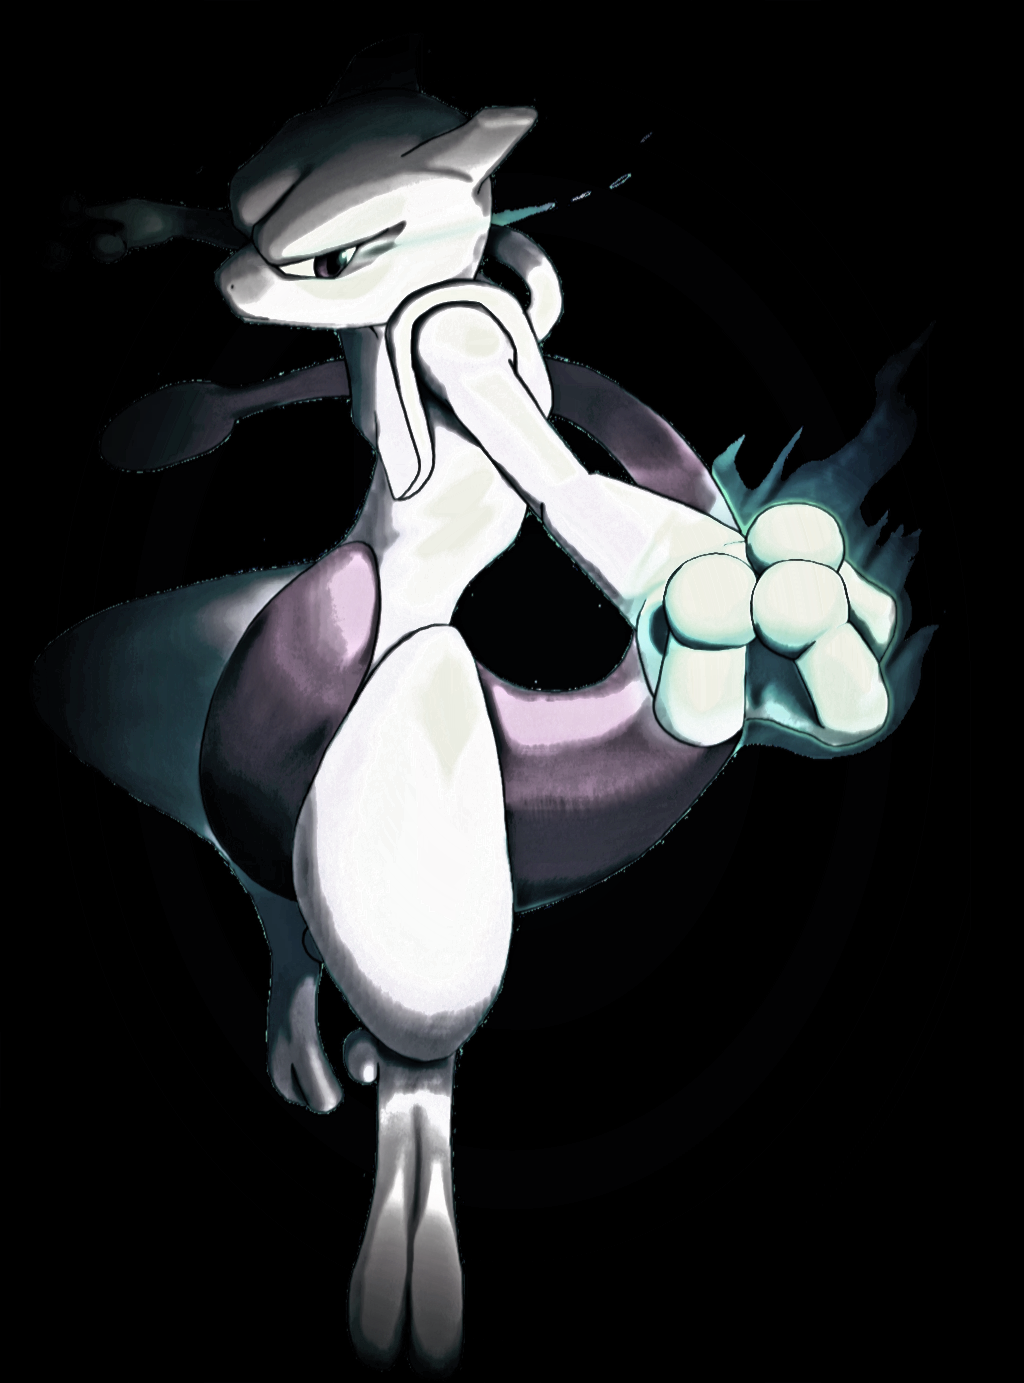 An edited Mewtwo for a phone wallpaper, requested by ...